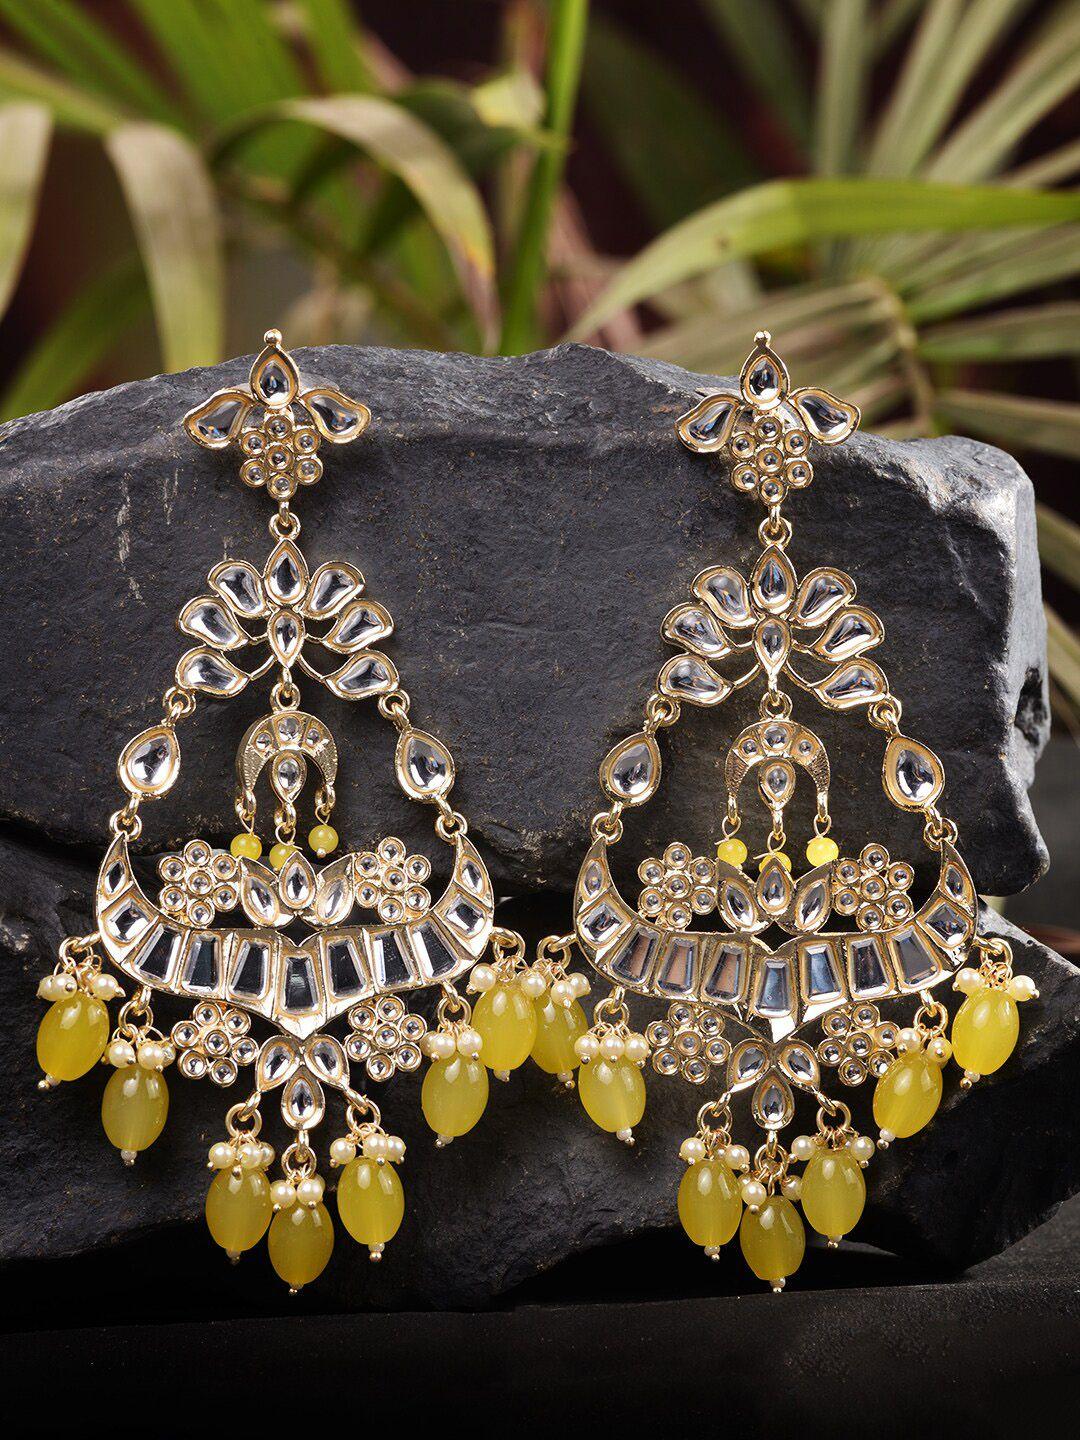 saraf rs jewellery gold-toned & yellow contemporary chandbalis earrings